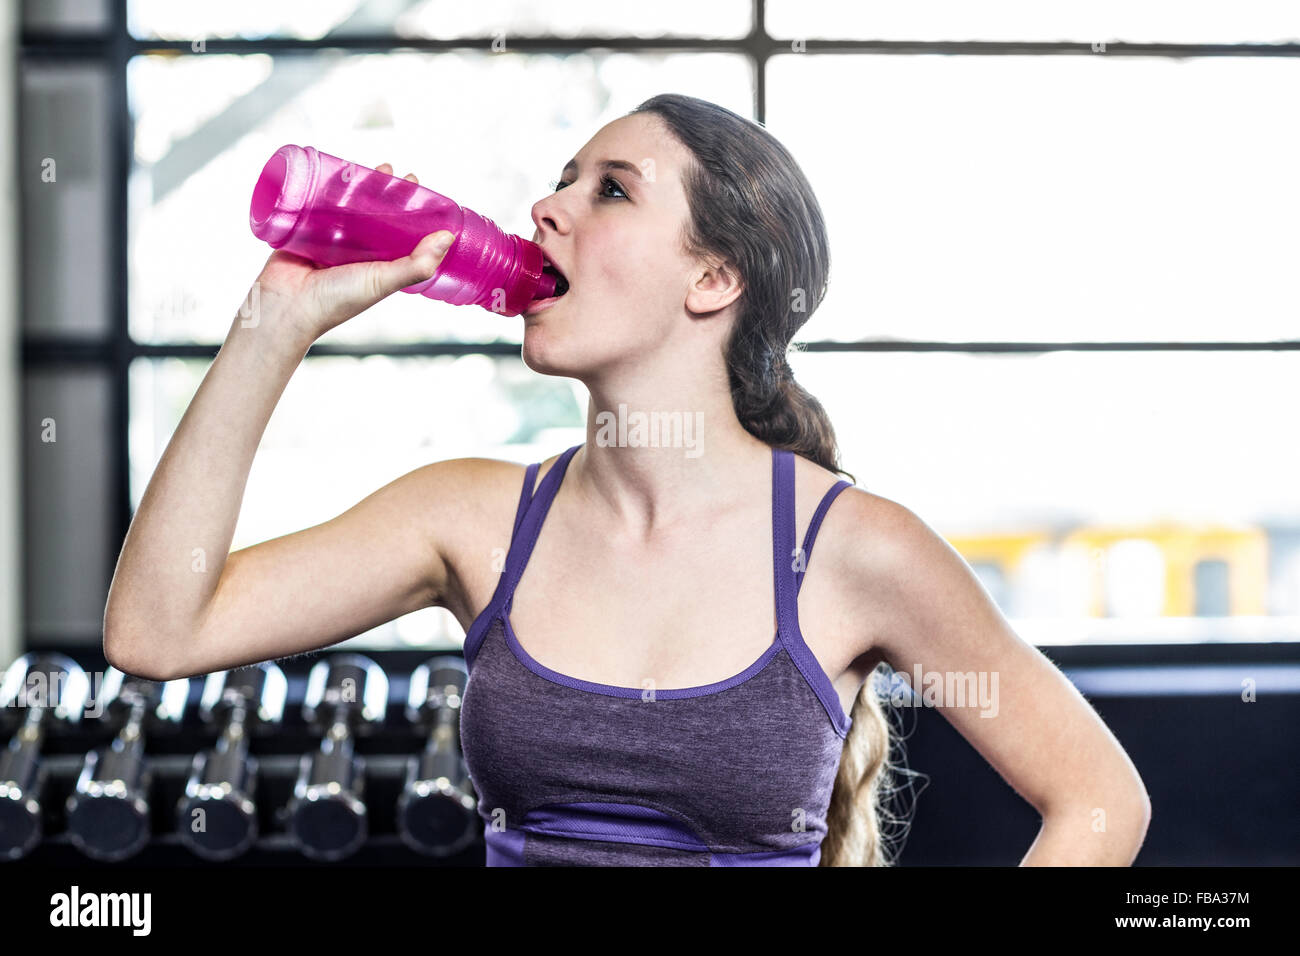 Thirsty woman drinking water on exercise ball Stock Photo